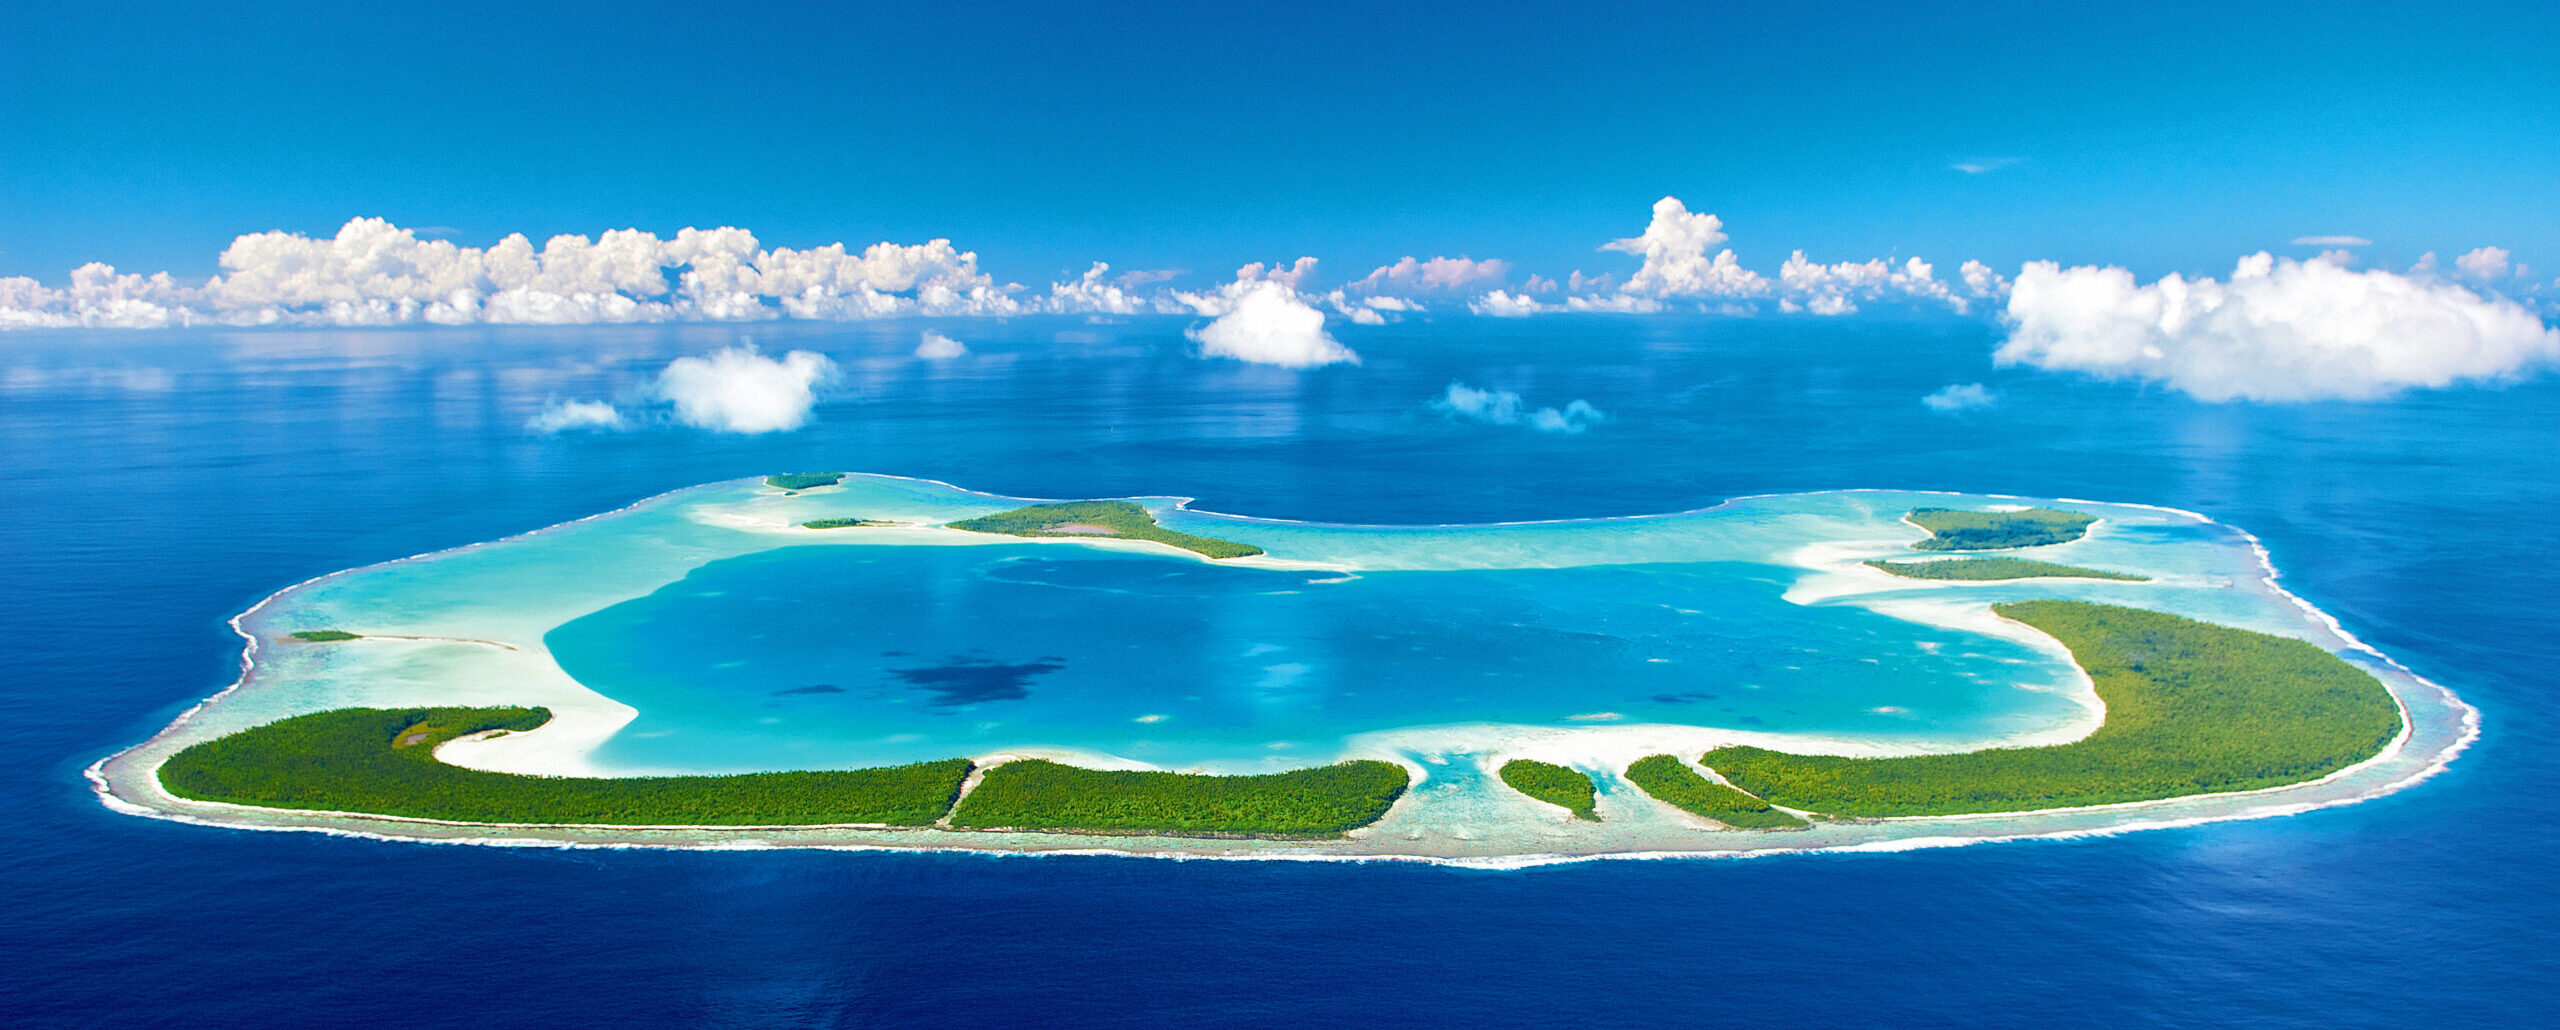 Aerial view of the Tetiaroa atoll and surrounding waters